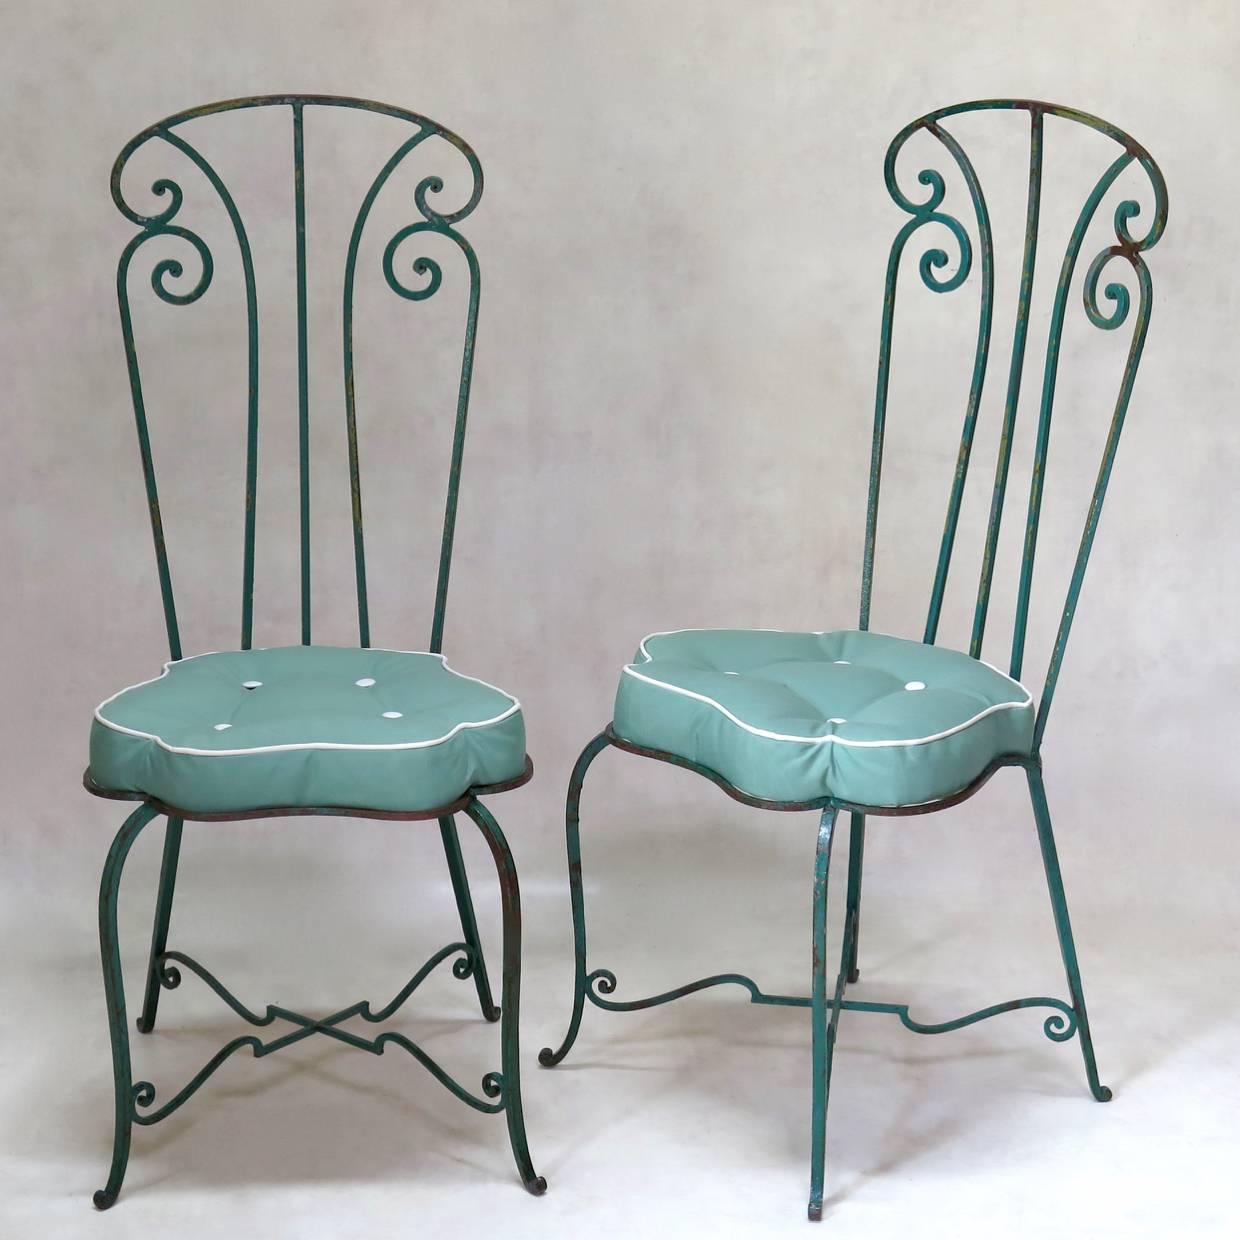 Rare and elegant set of seven high-backed iron chairs with unusual, curving, flower-shaped seats fitted with newly-made button-tufted cushions, in outdoor fabric. The structure is painted green, with other colours showing beneath in areas. The legs